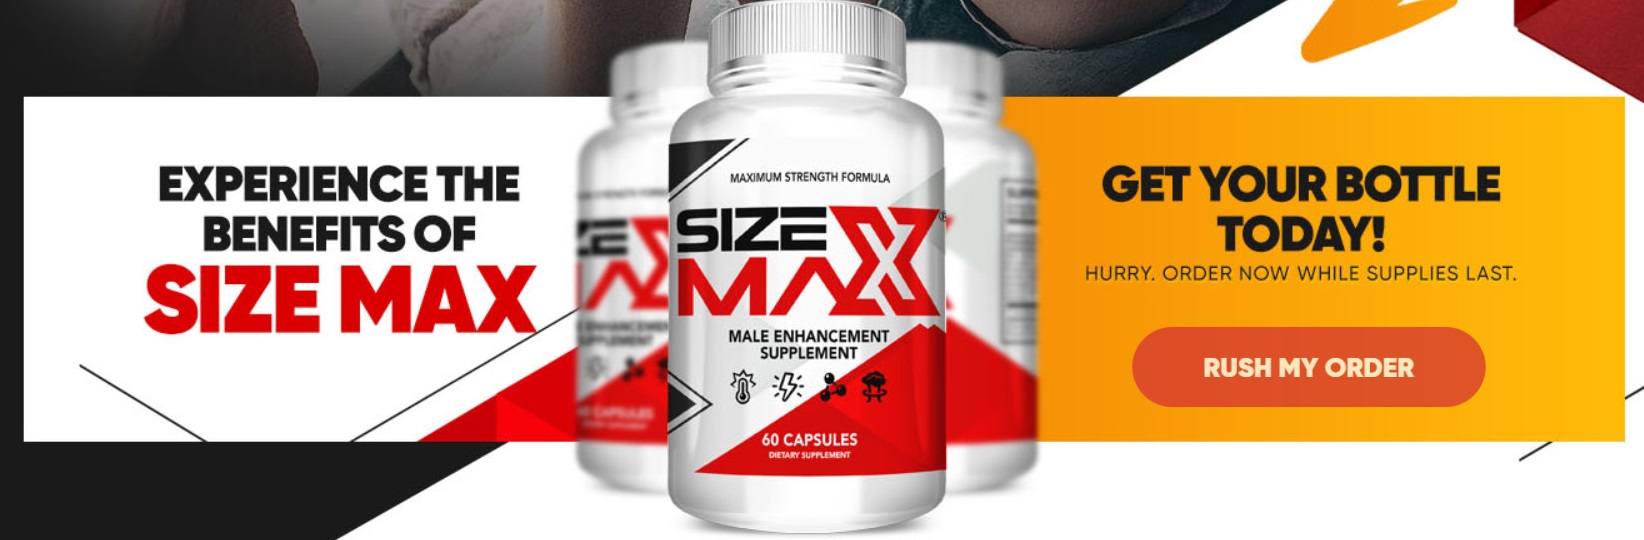 Size Max USA Reviews || Size Max Male Enhancement Official Website & Price  | TechPlanet